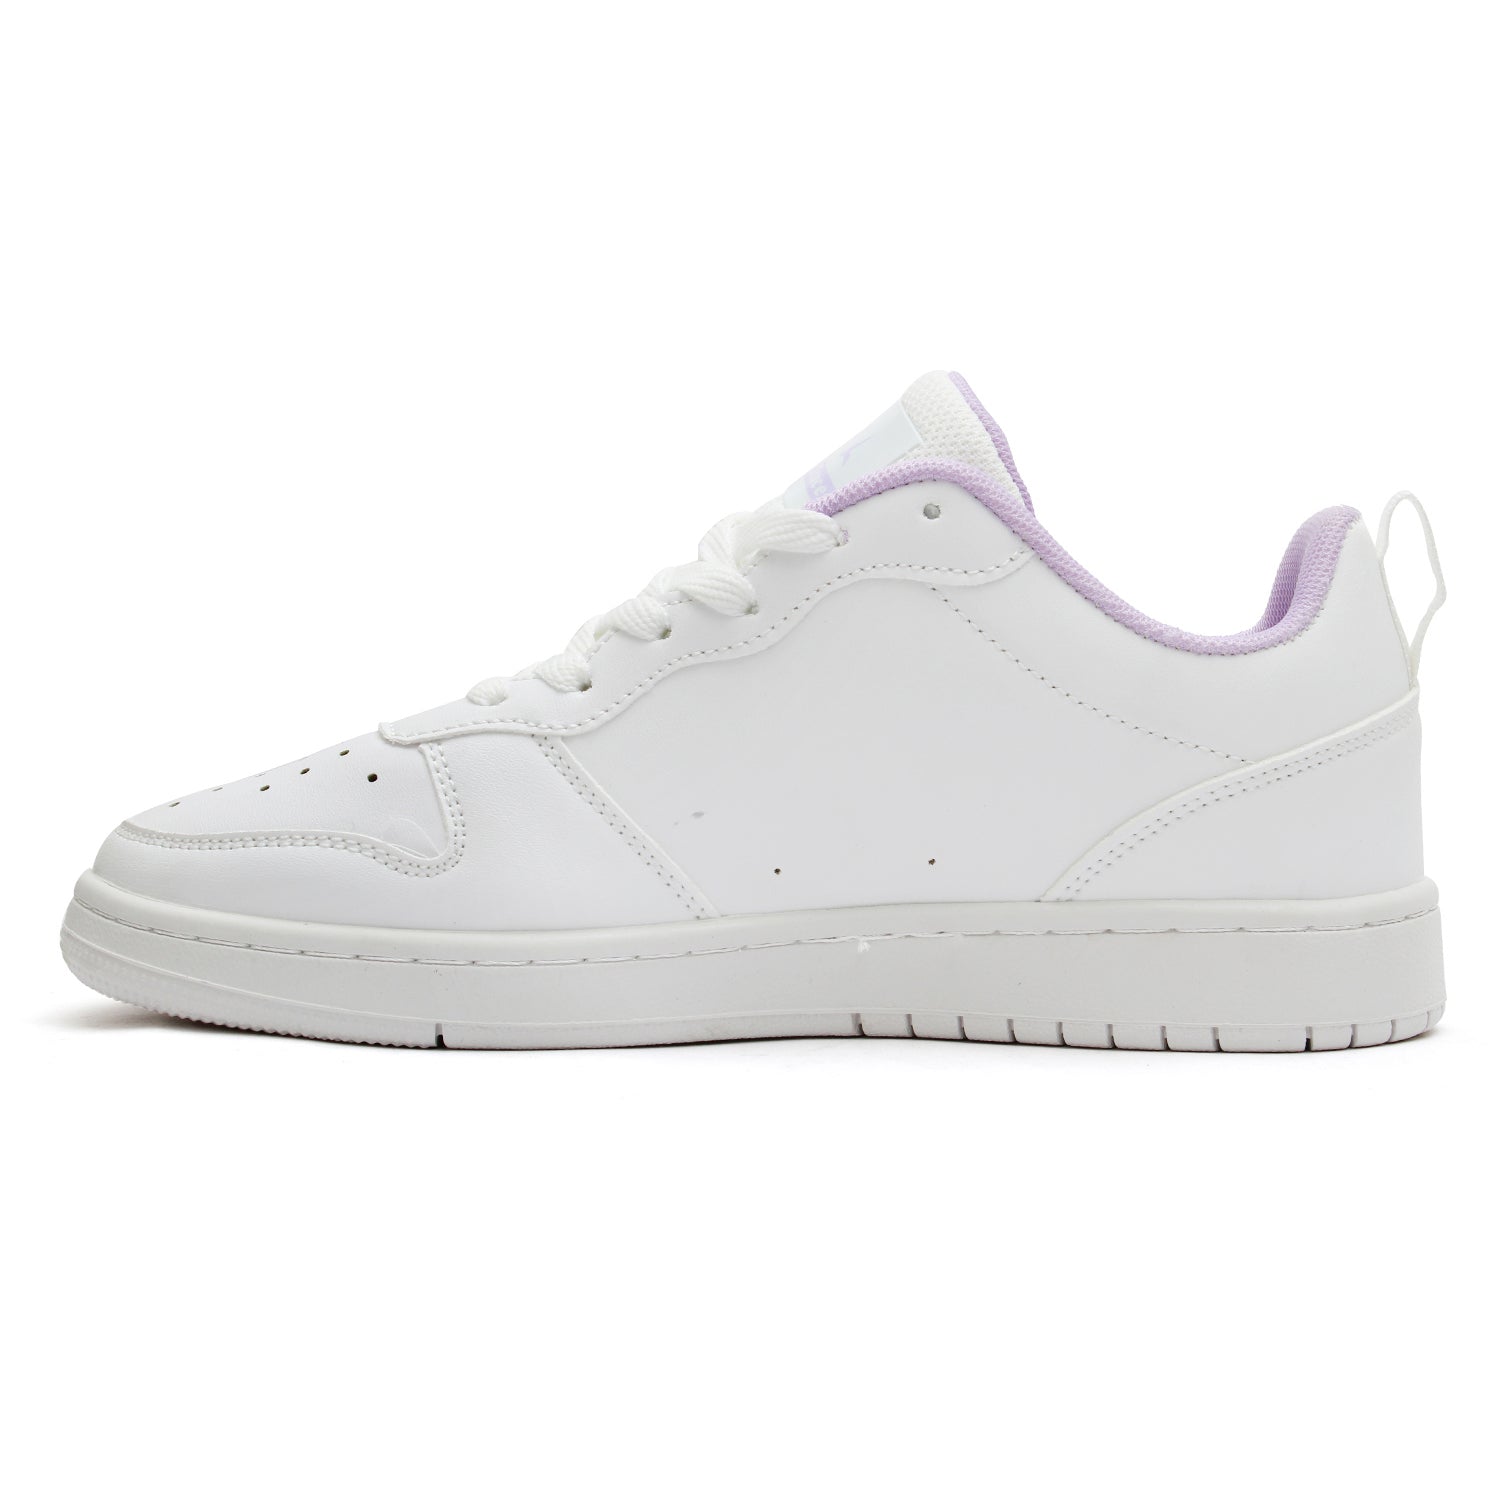 Tracer Shoes Women's Sneakers Lavender